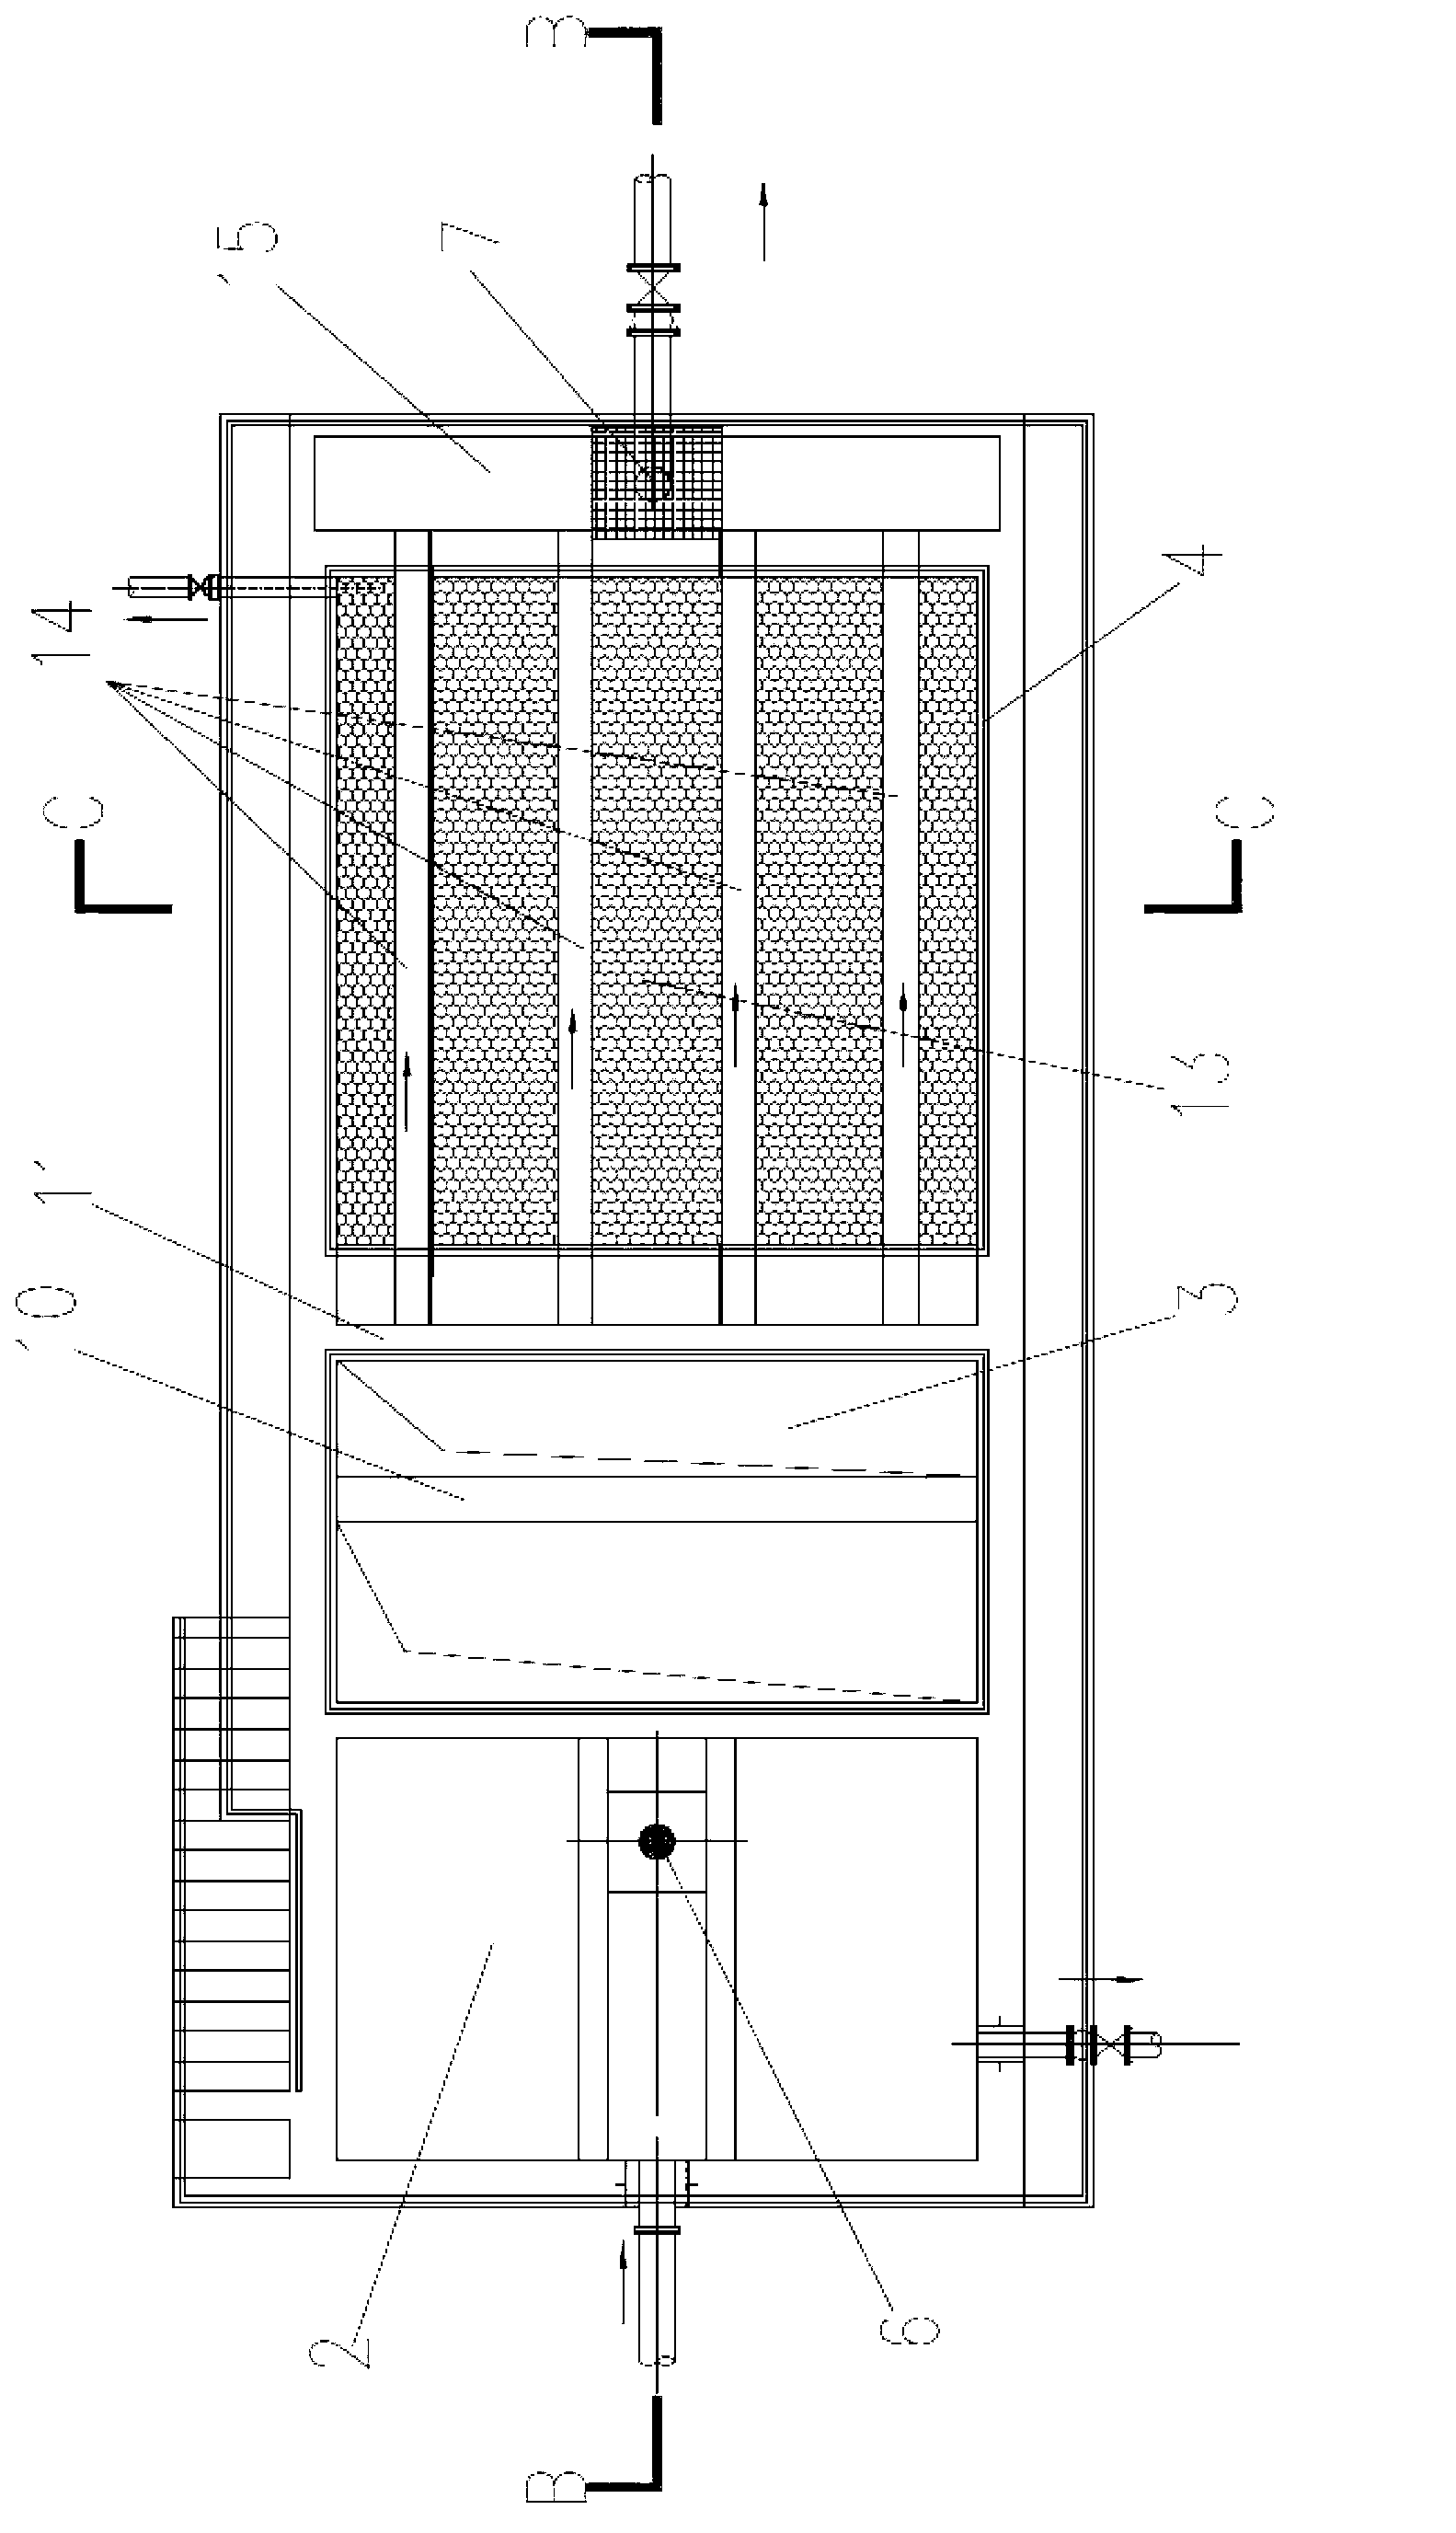 Regulation and storage pond with processing function